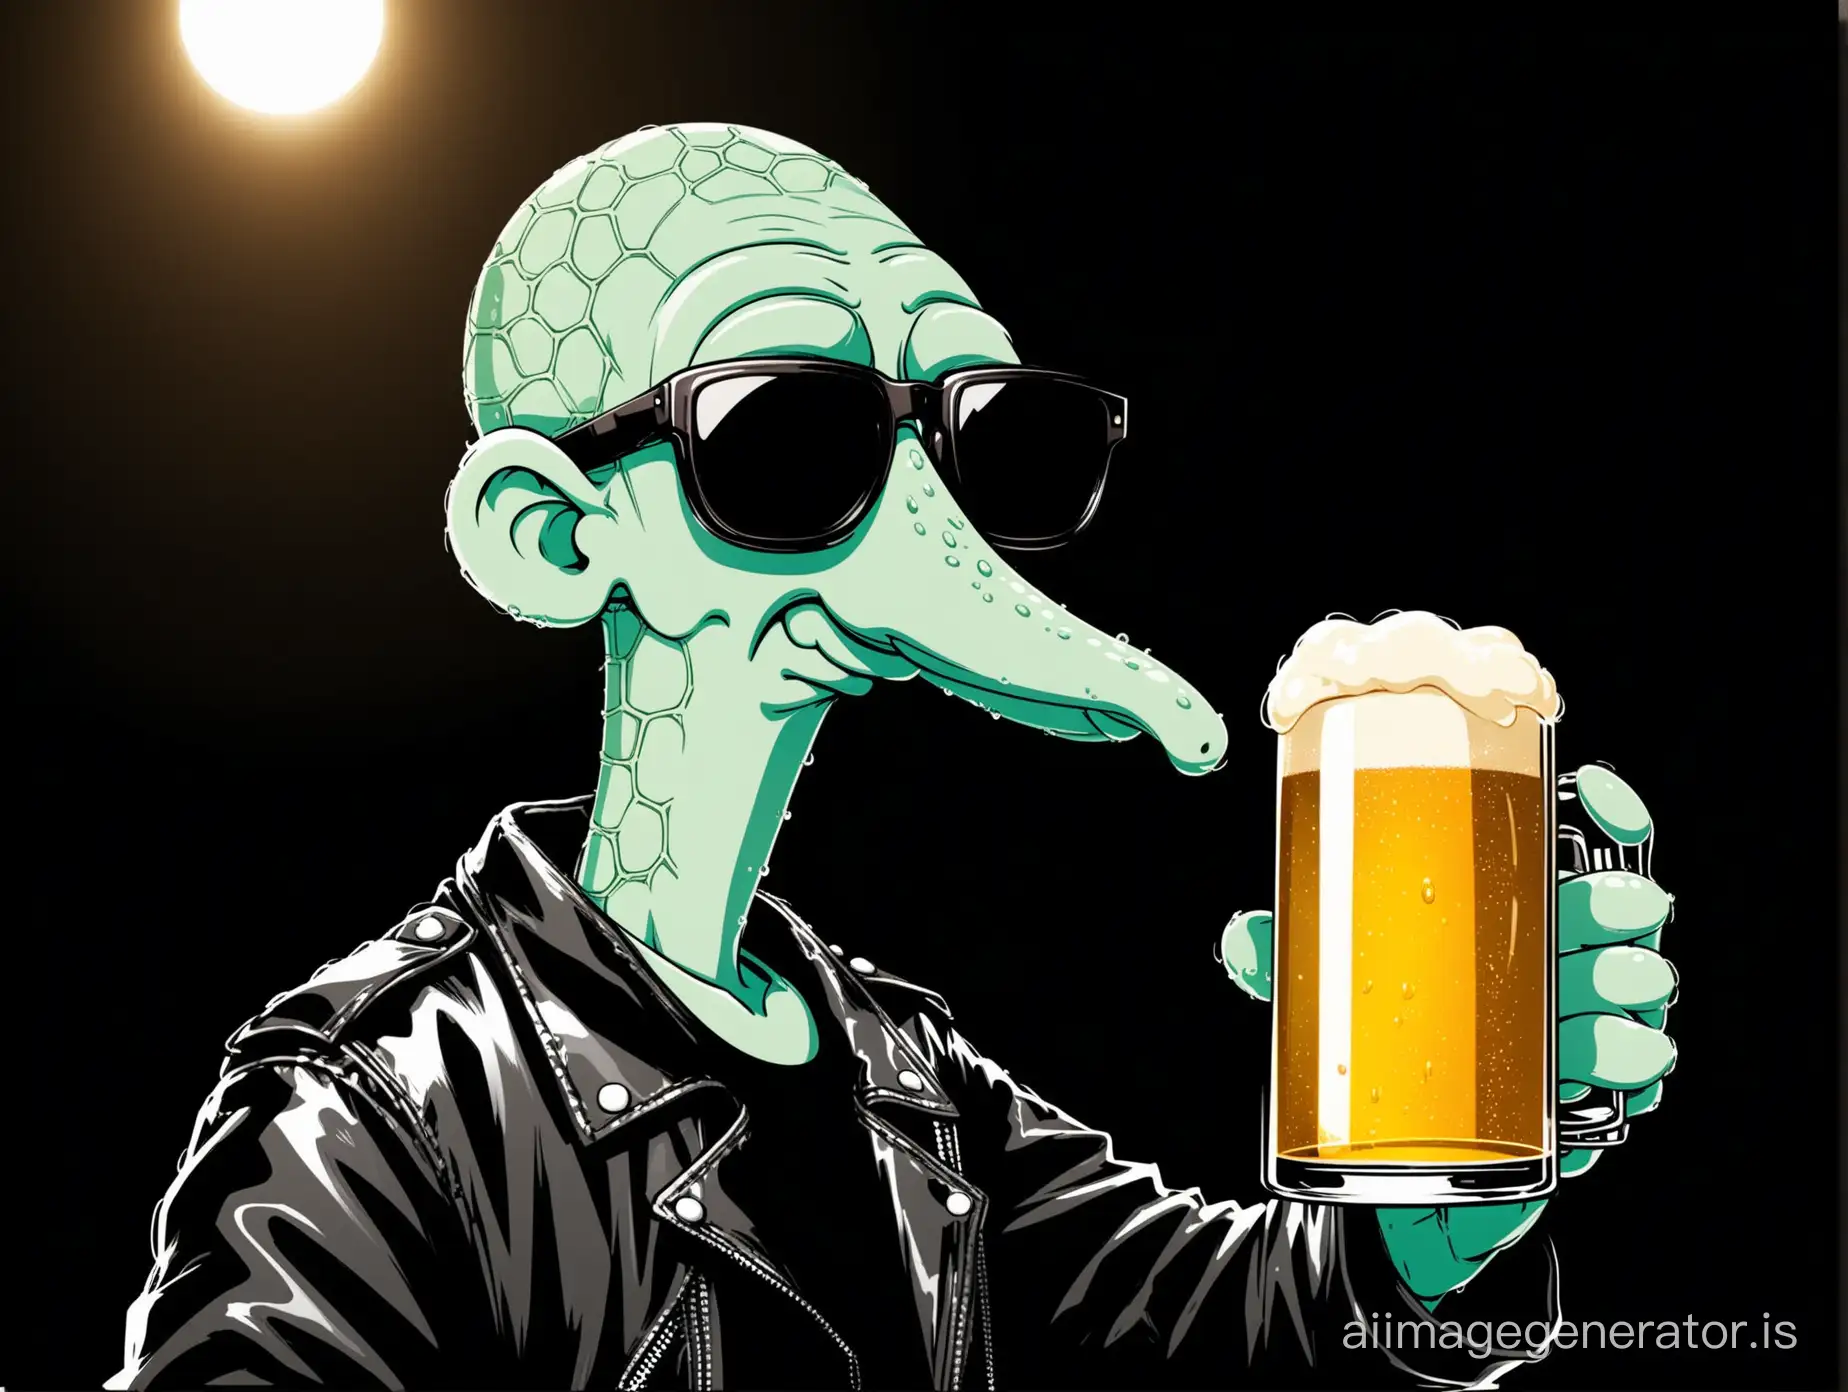 imagine Squidward wearing sunglasses, black leather jacket with a logo that says "Aqua". Holding a beer, looking ahead smiling. Studio photo. network backlighting. Clean black background